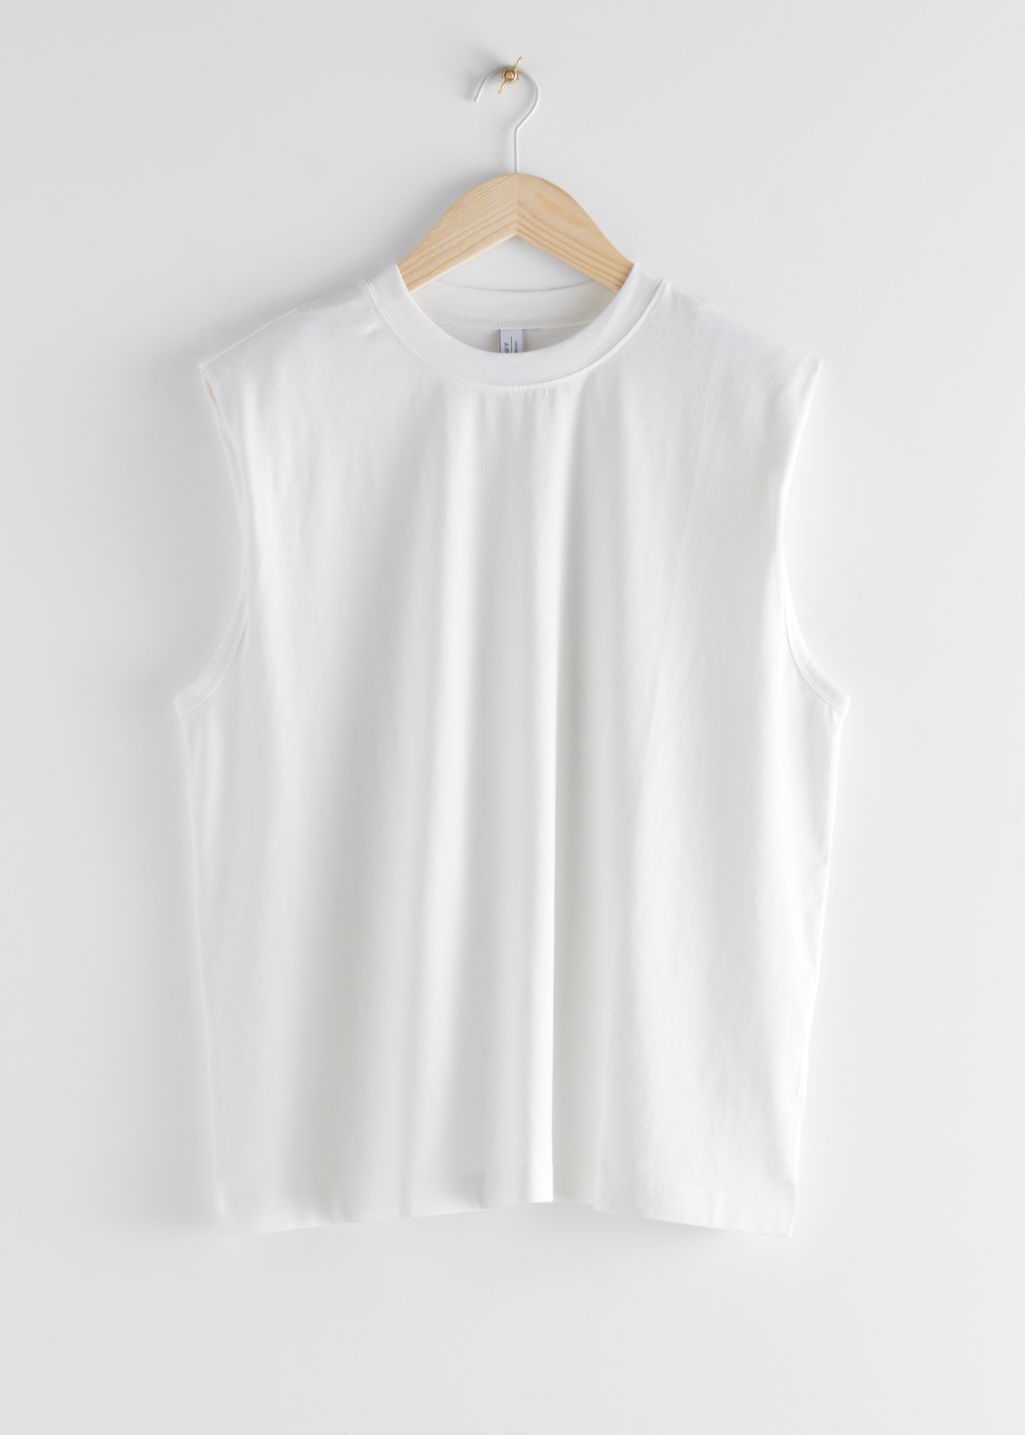 Padded Shoulder Tank Top - White - Tanktops & Camisoles - & Other Stories